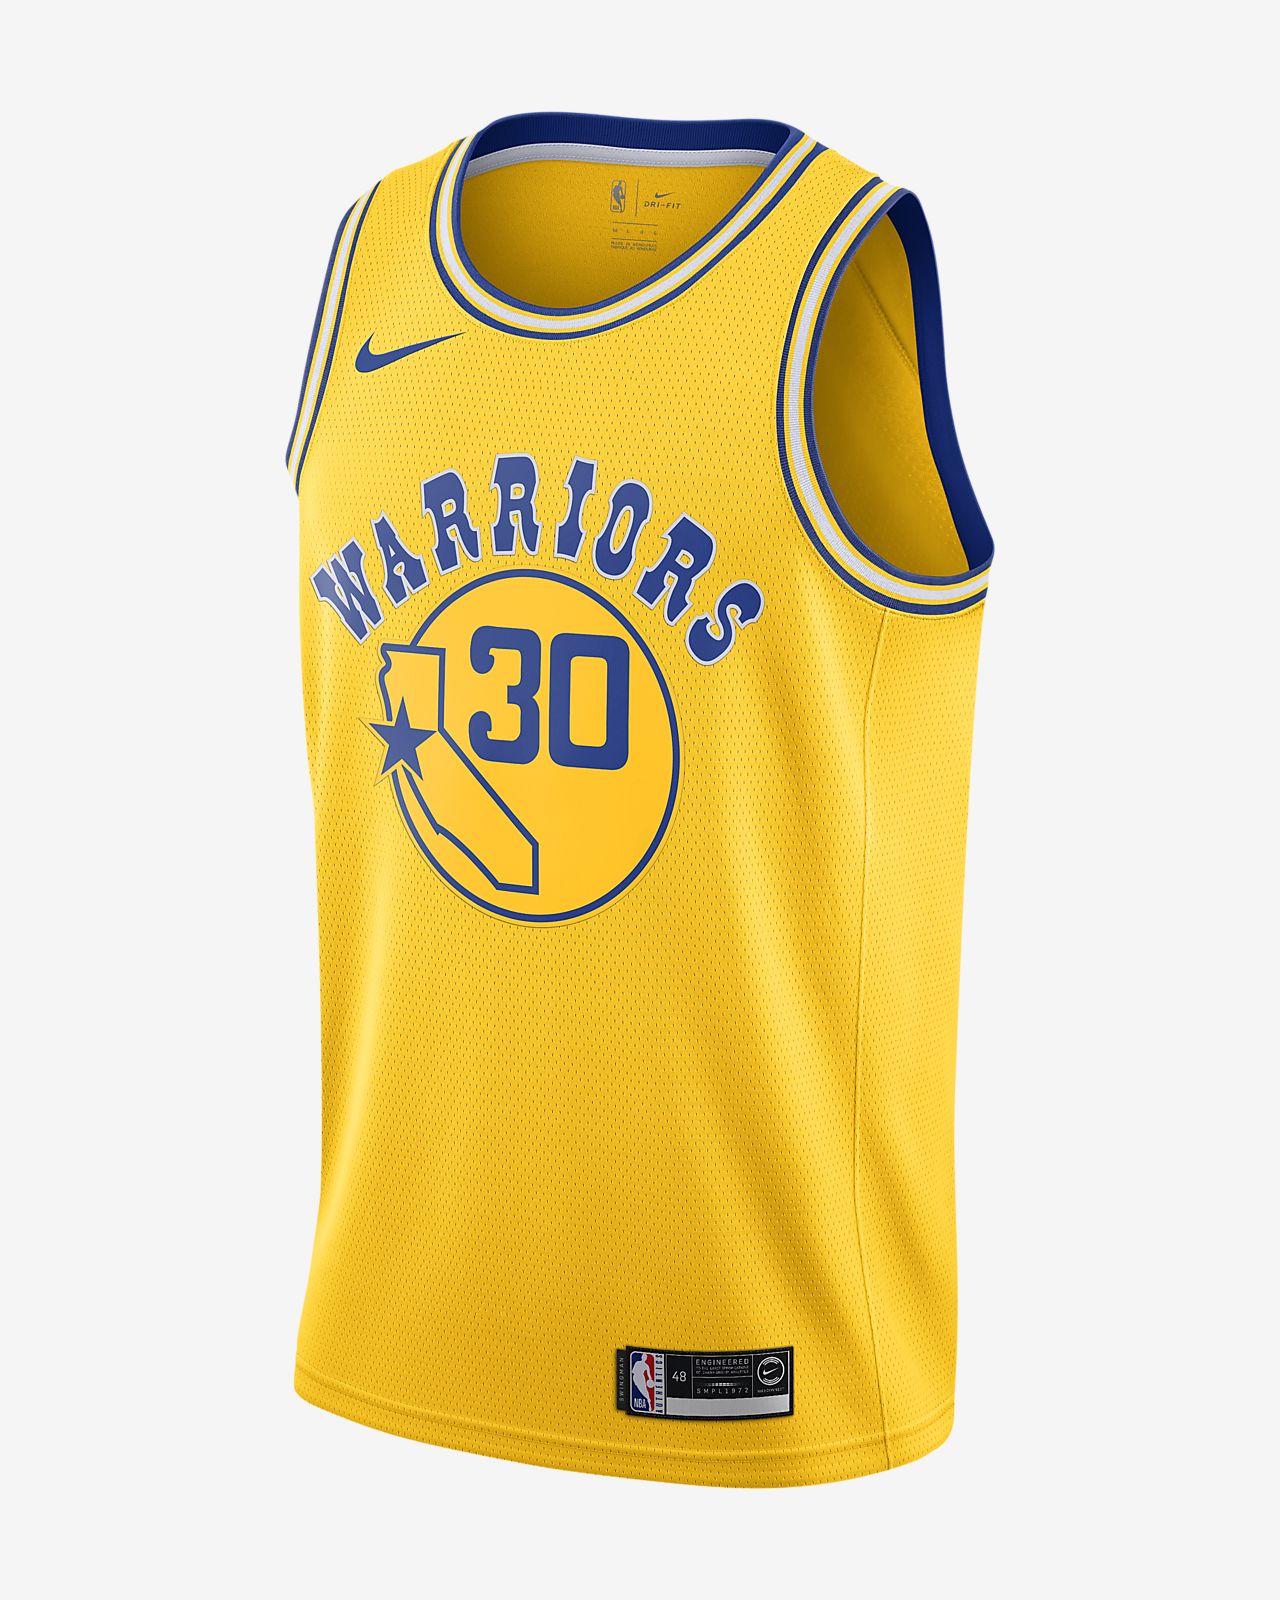 nba store stephen curry jersey